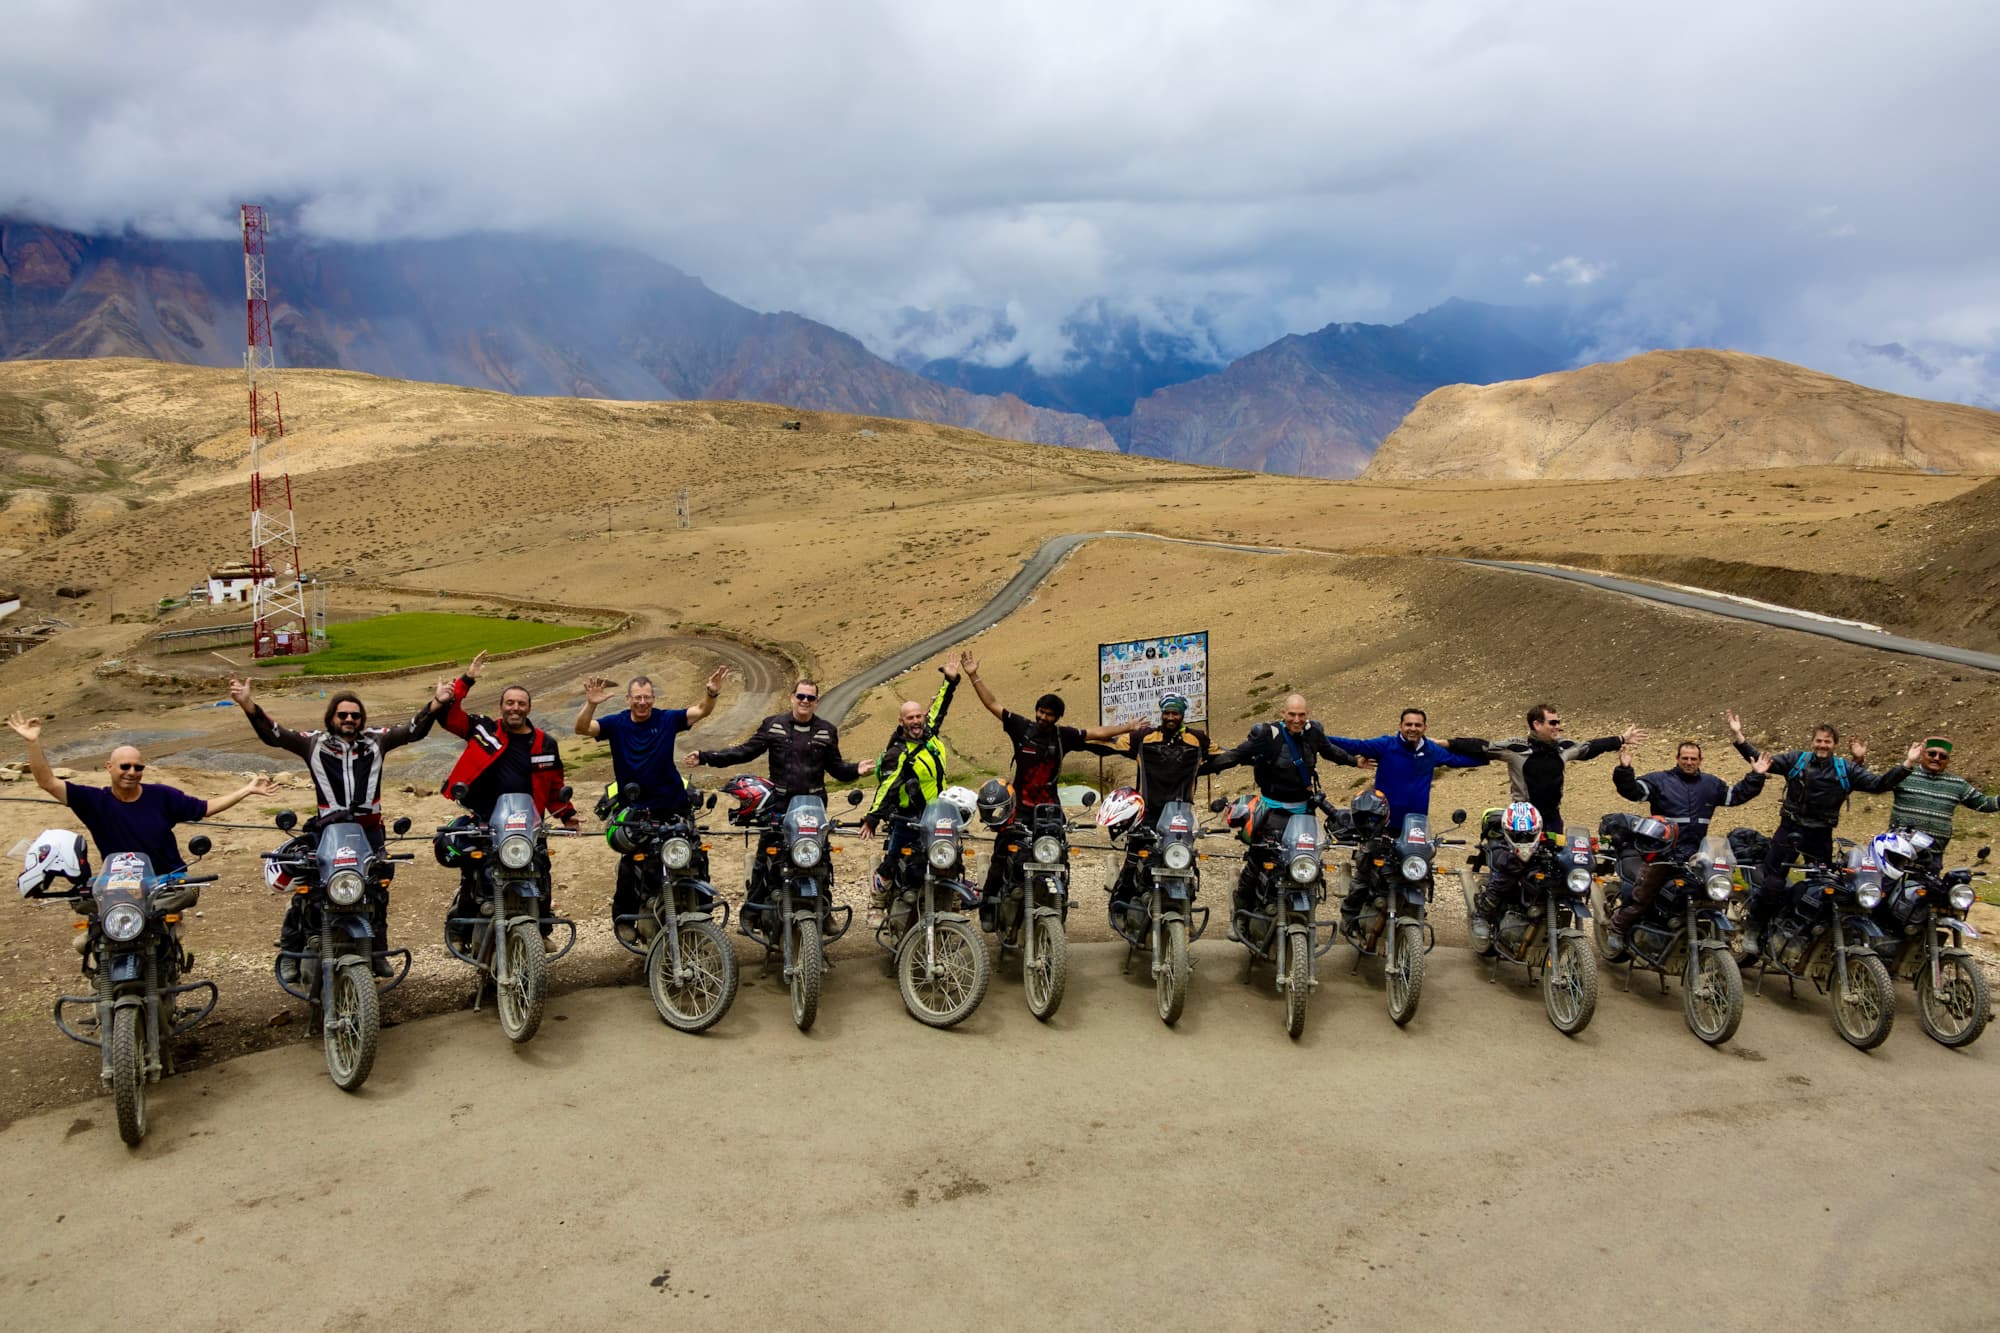 Brm Expeditions - Motorcycle Tours in India